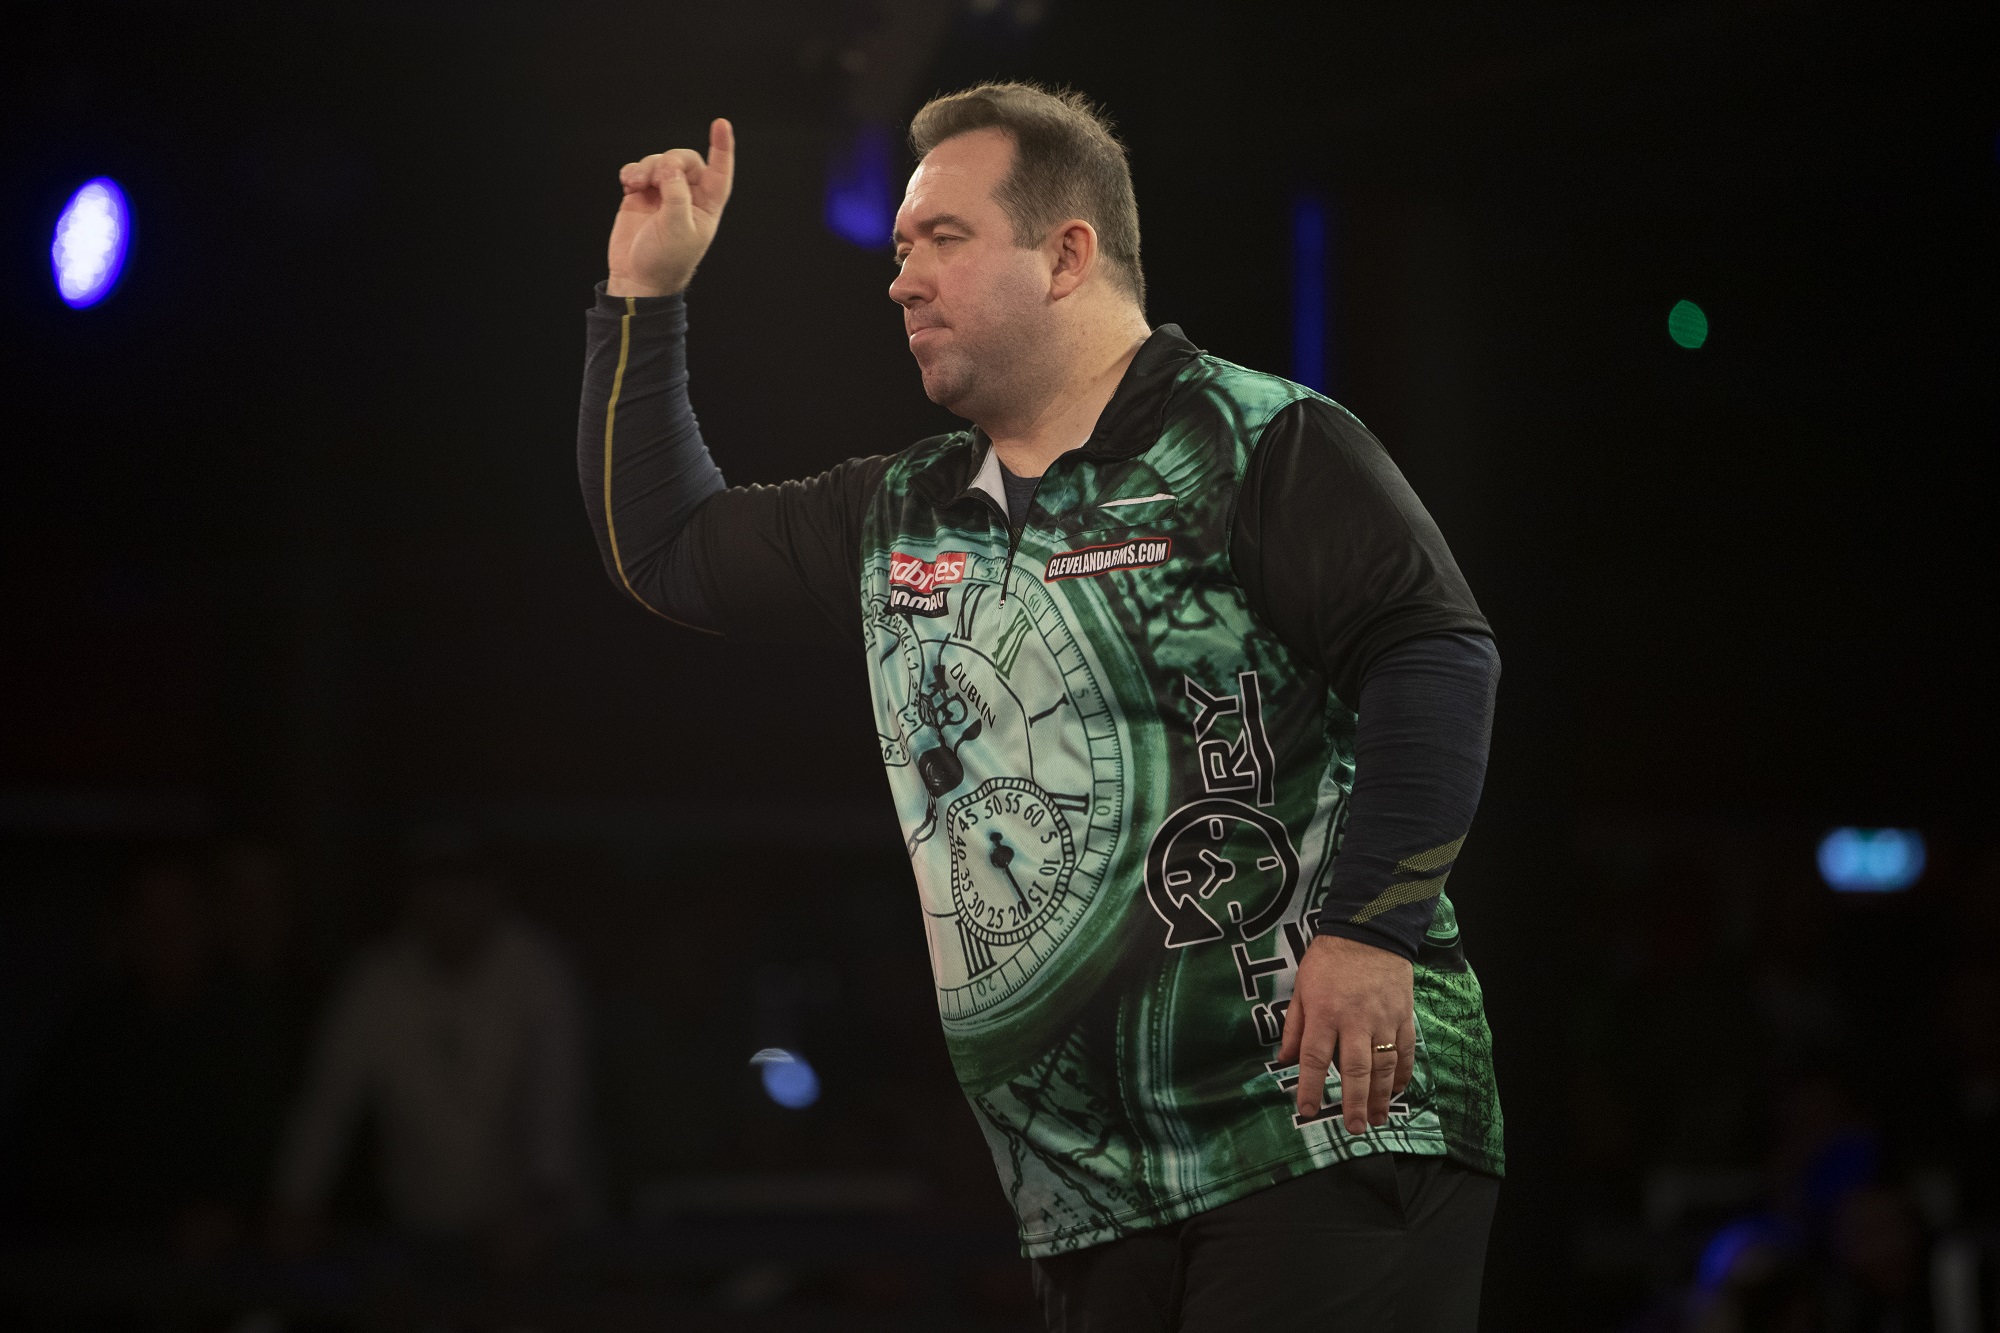 Dolan defeats Smith to win day one of PDC Super Series